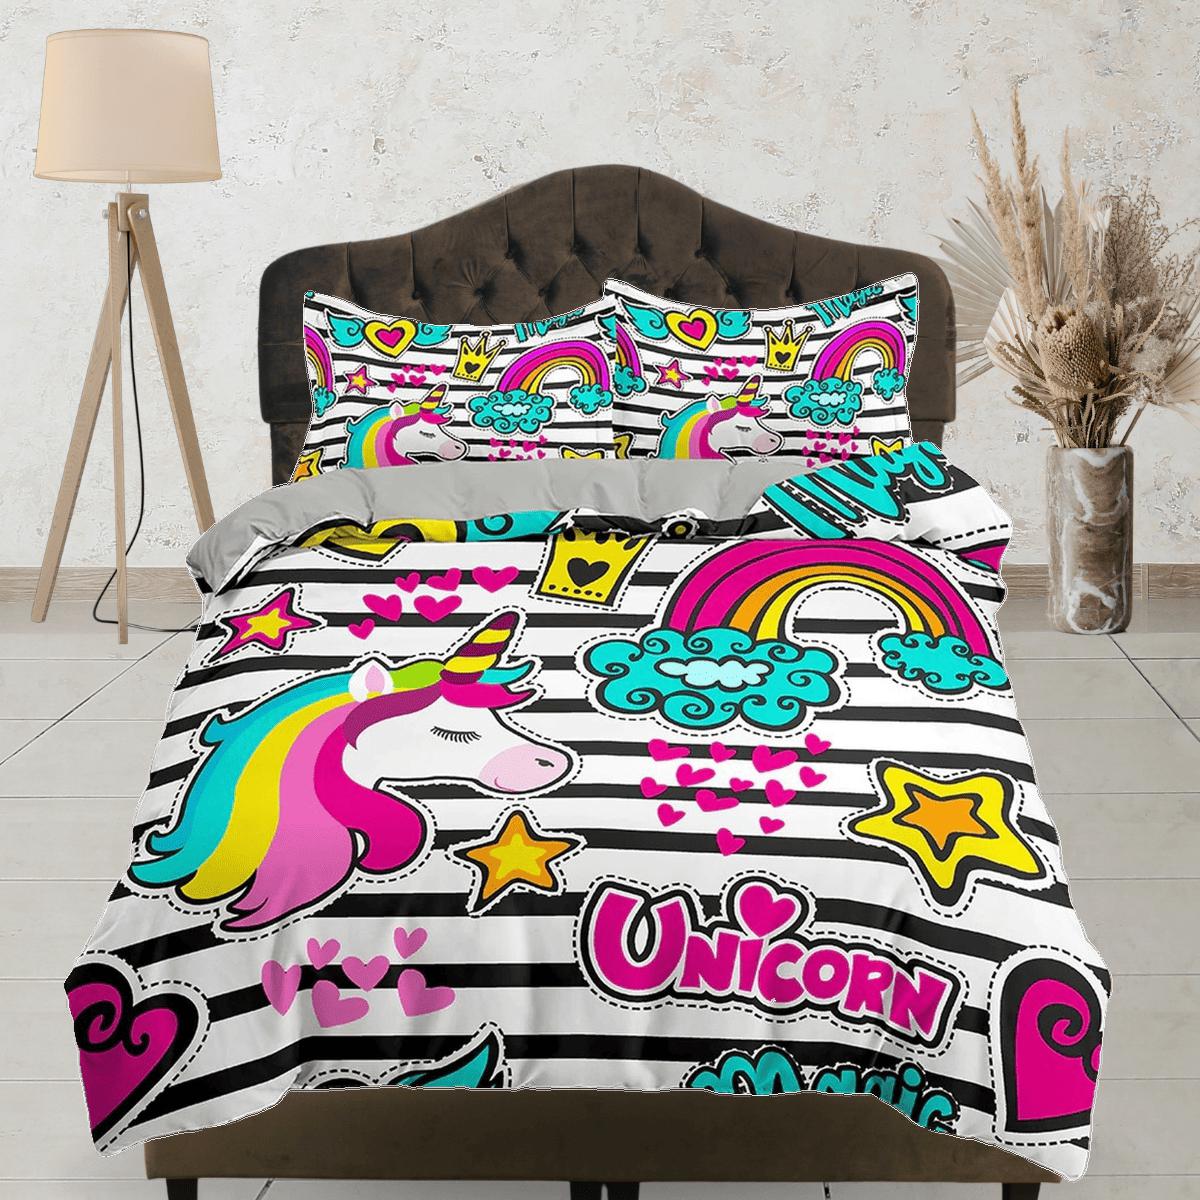 daintyduvet Colorful unicorn black and white stripes funky toddler bedding, unique duvet cover, crib bedding, baby zipper bedding, king queen full twin